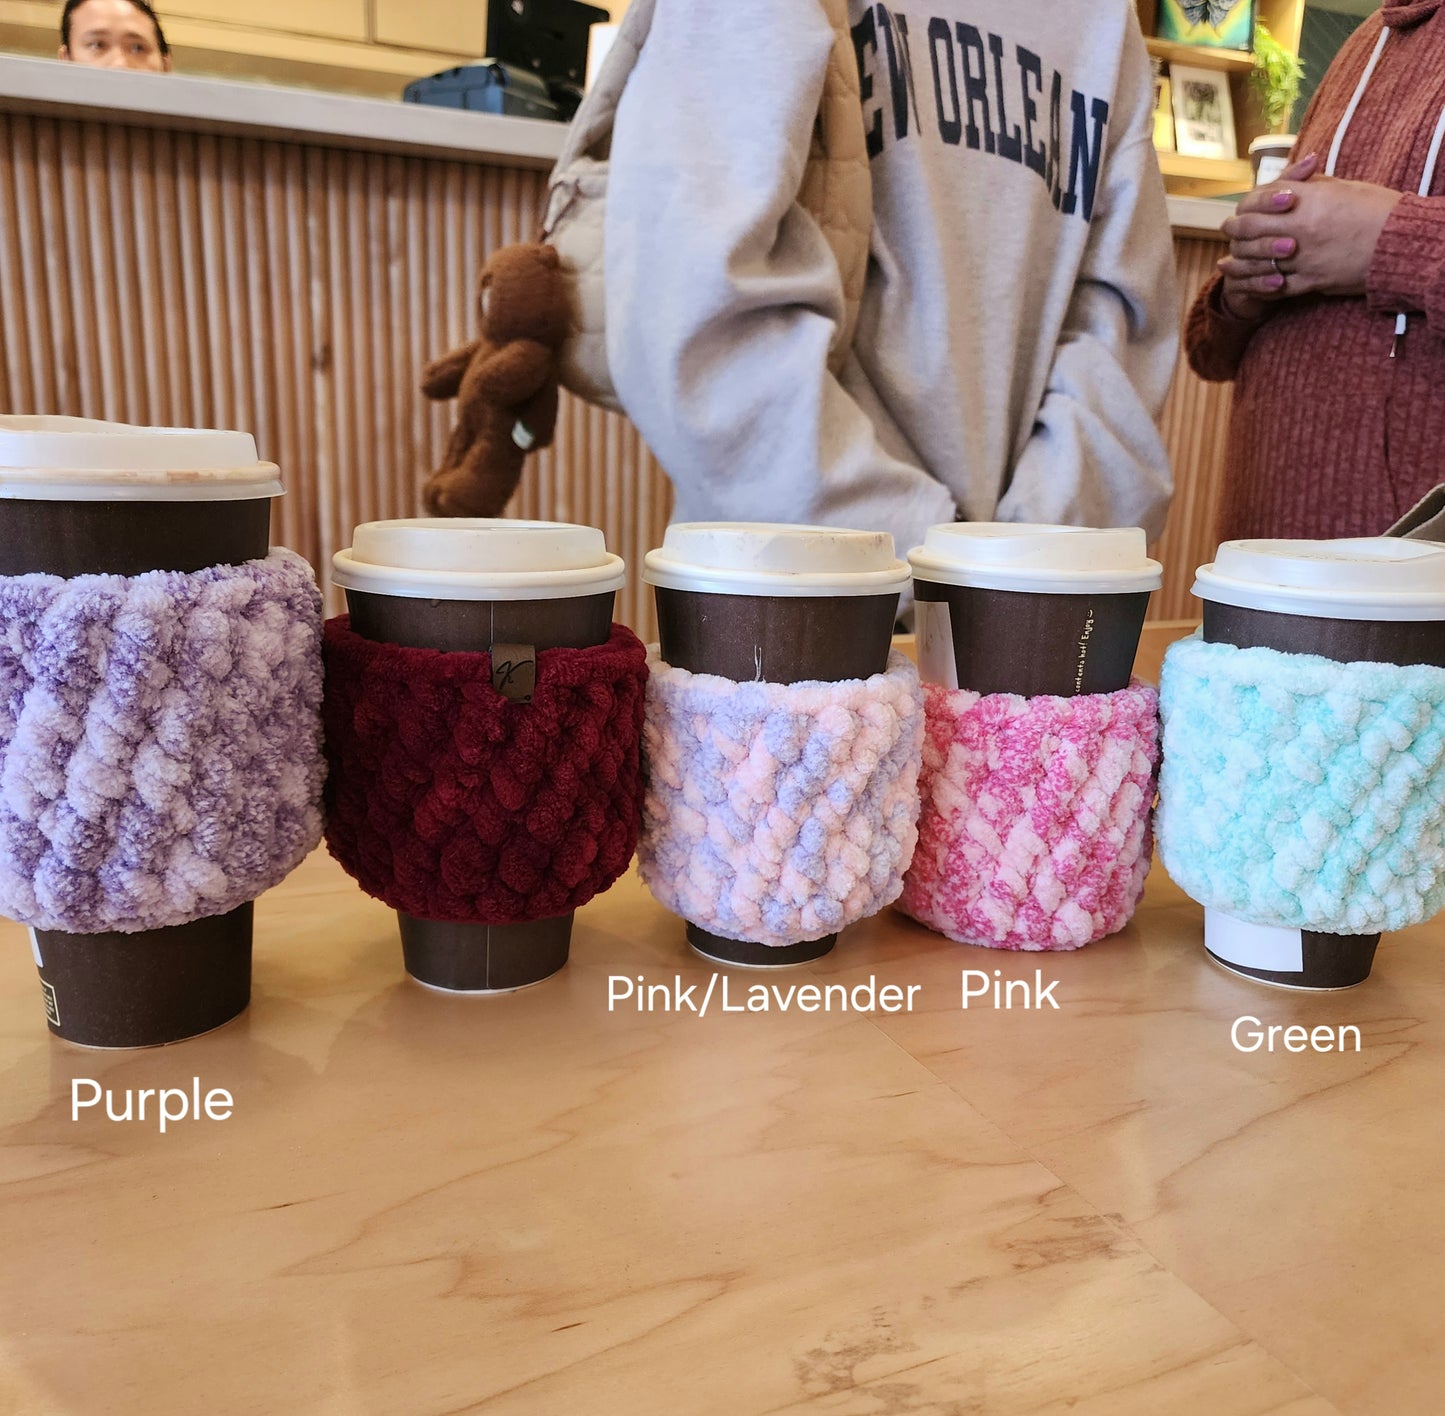 Kalipay Cozy Coozie